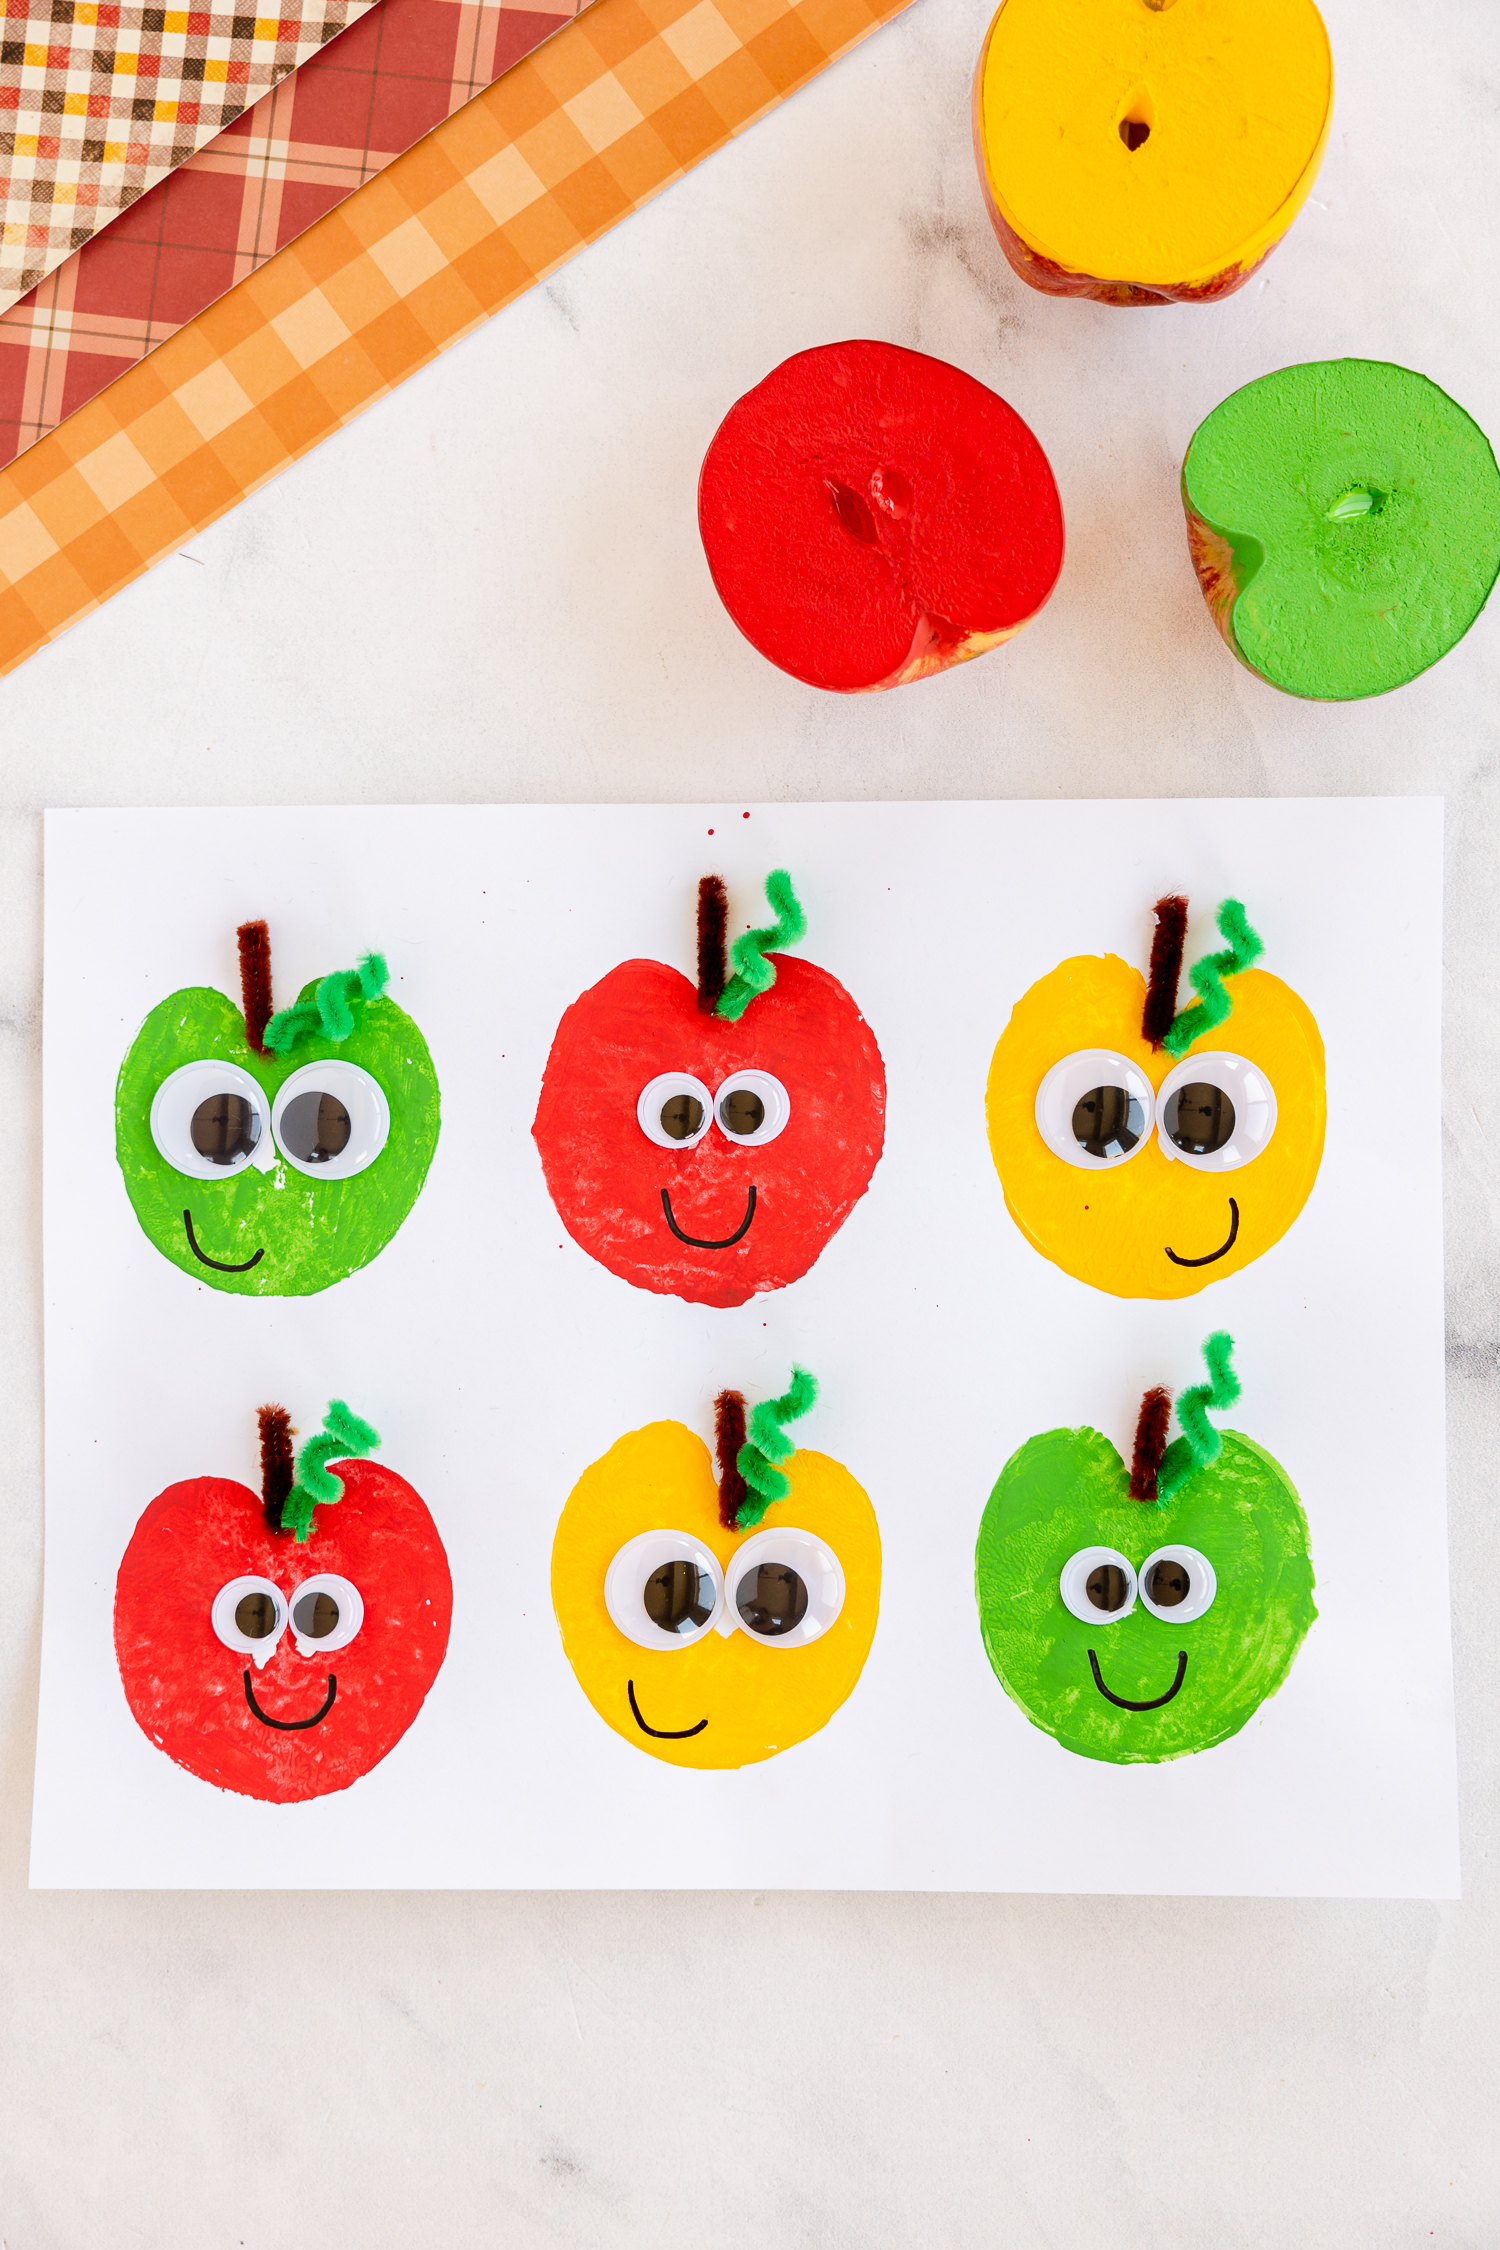 Red, green and yellow apple stamped prints on white paper